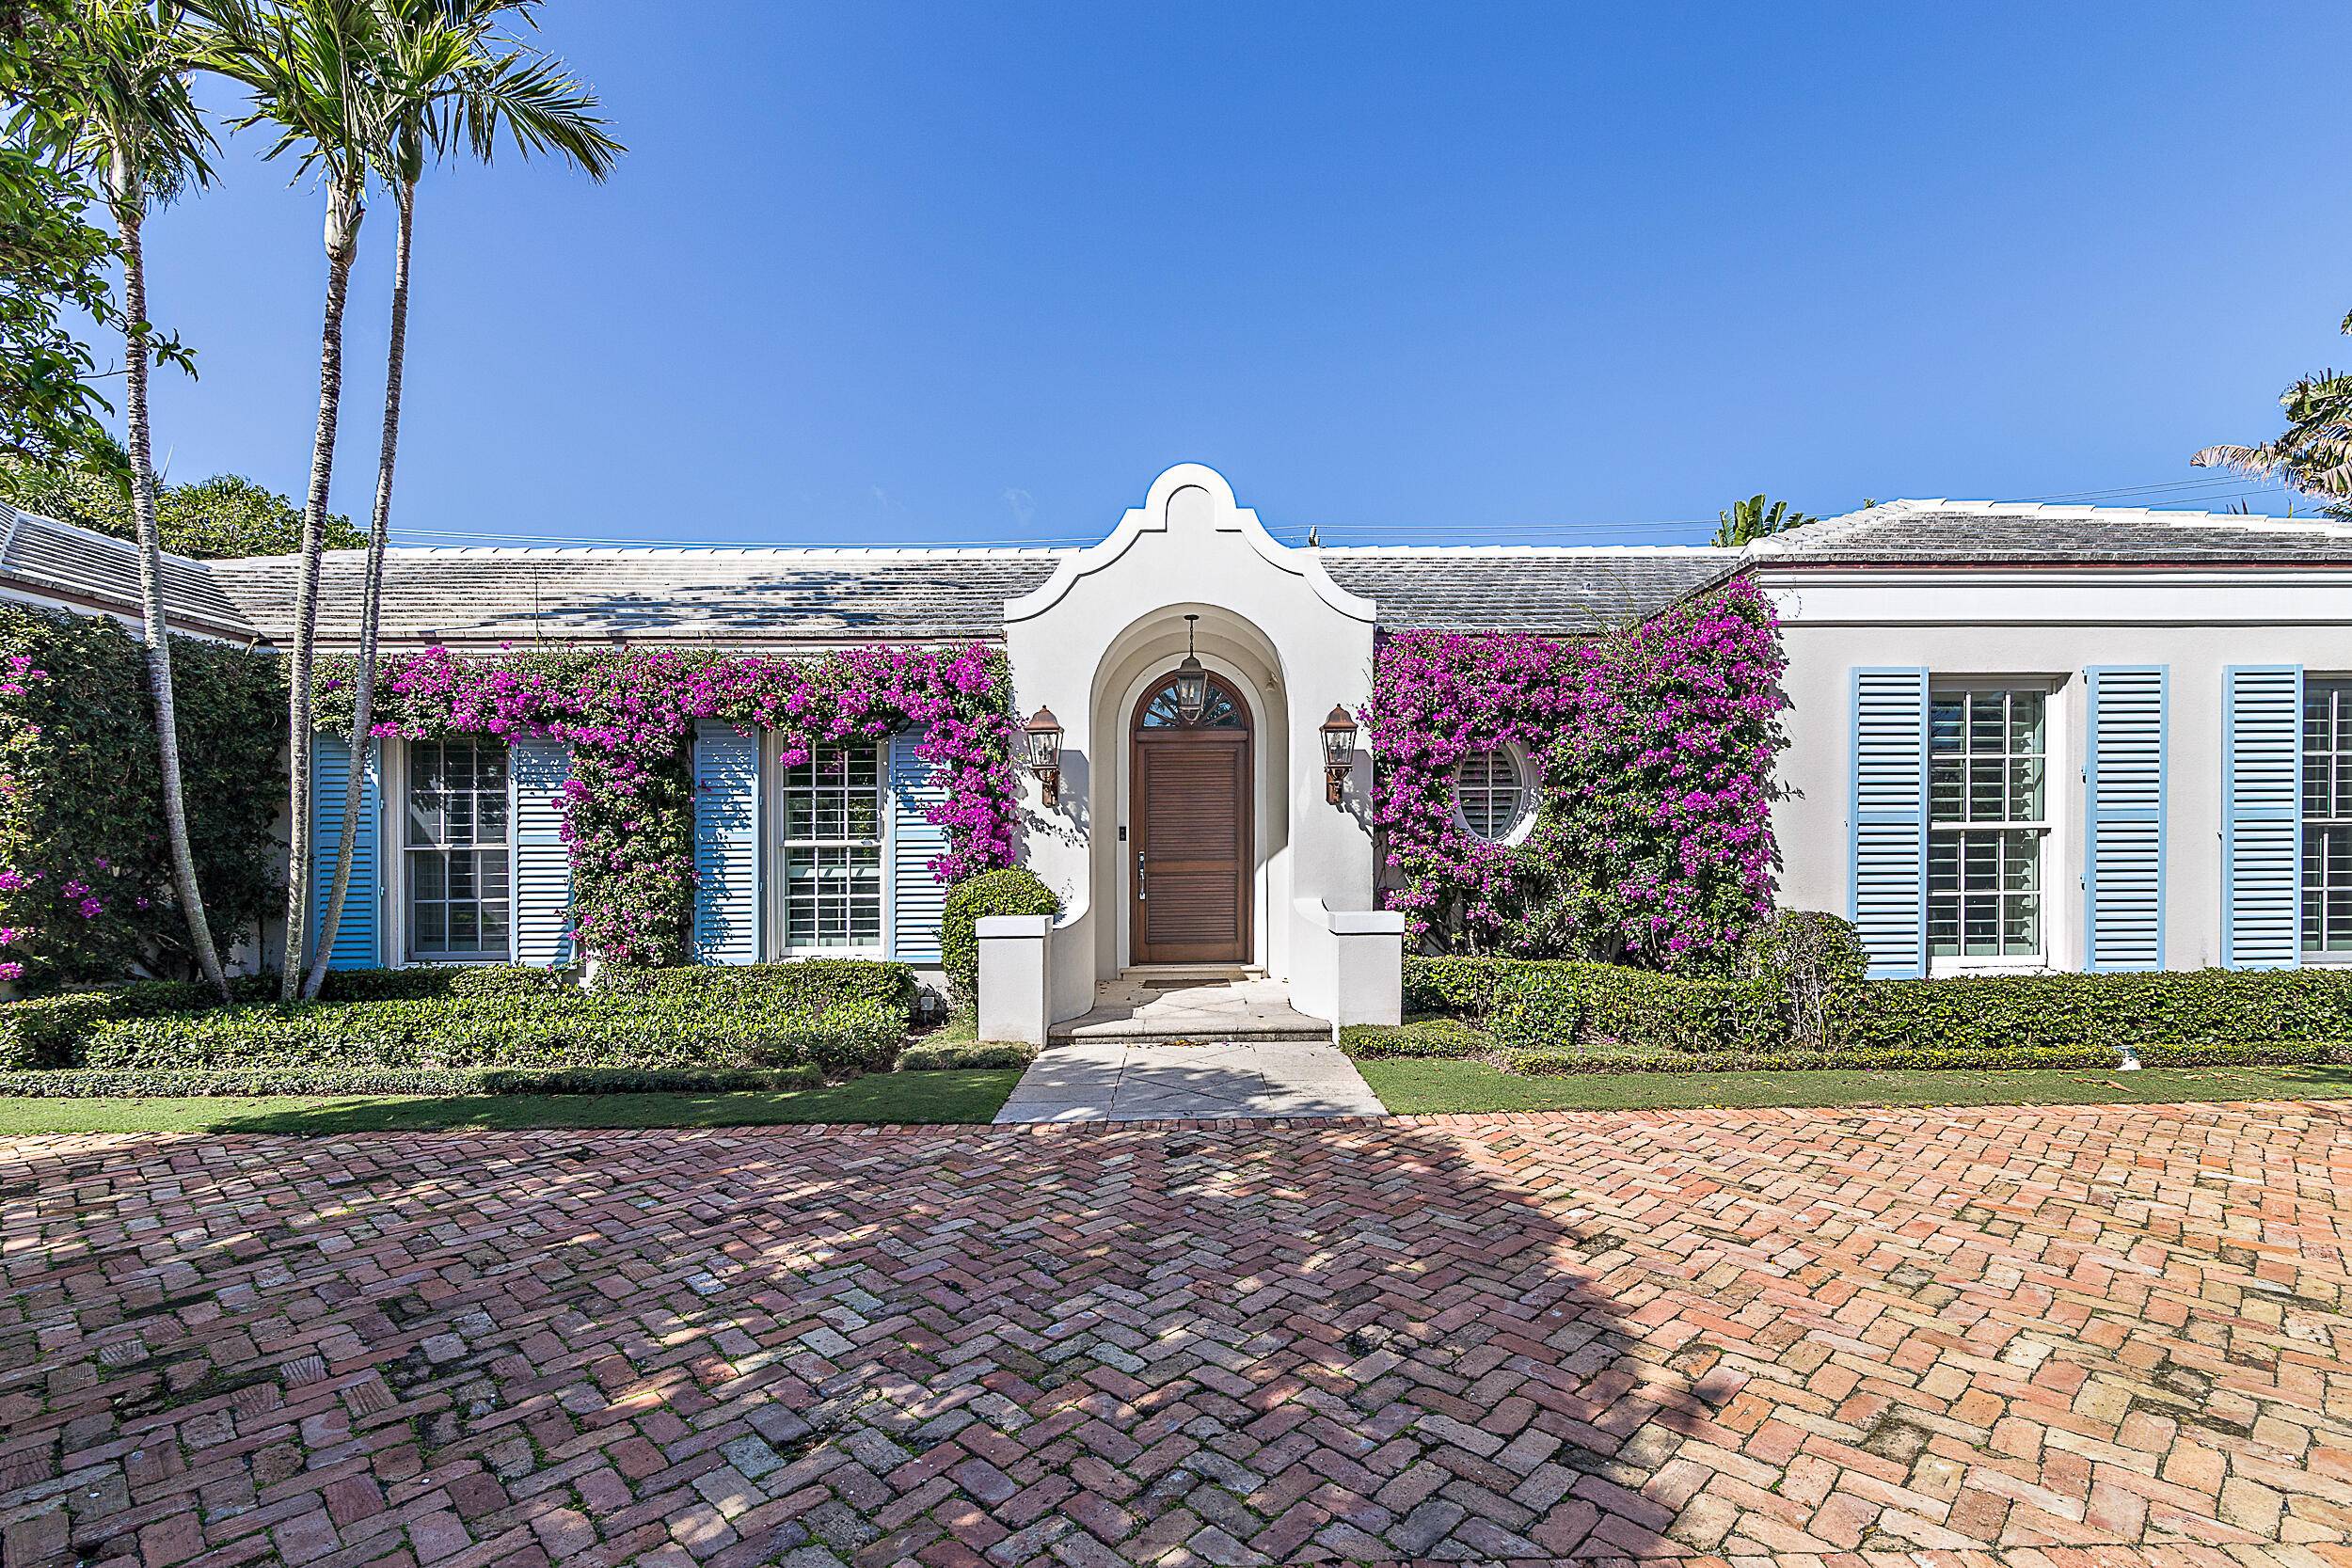 Romantic storybook curb appeal home !